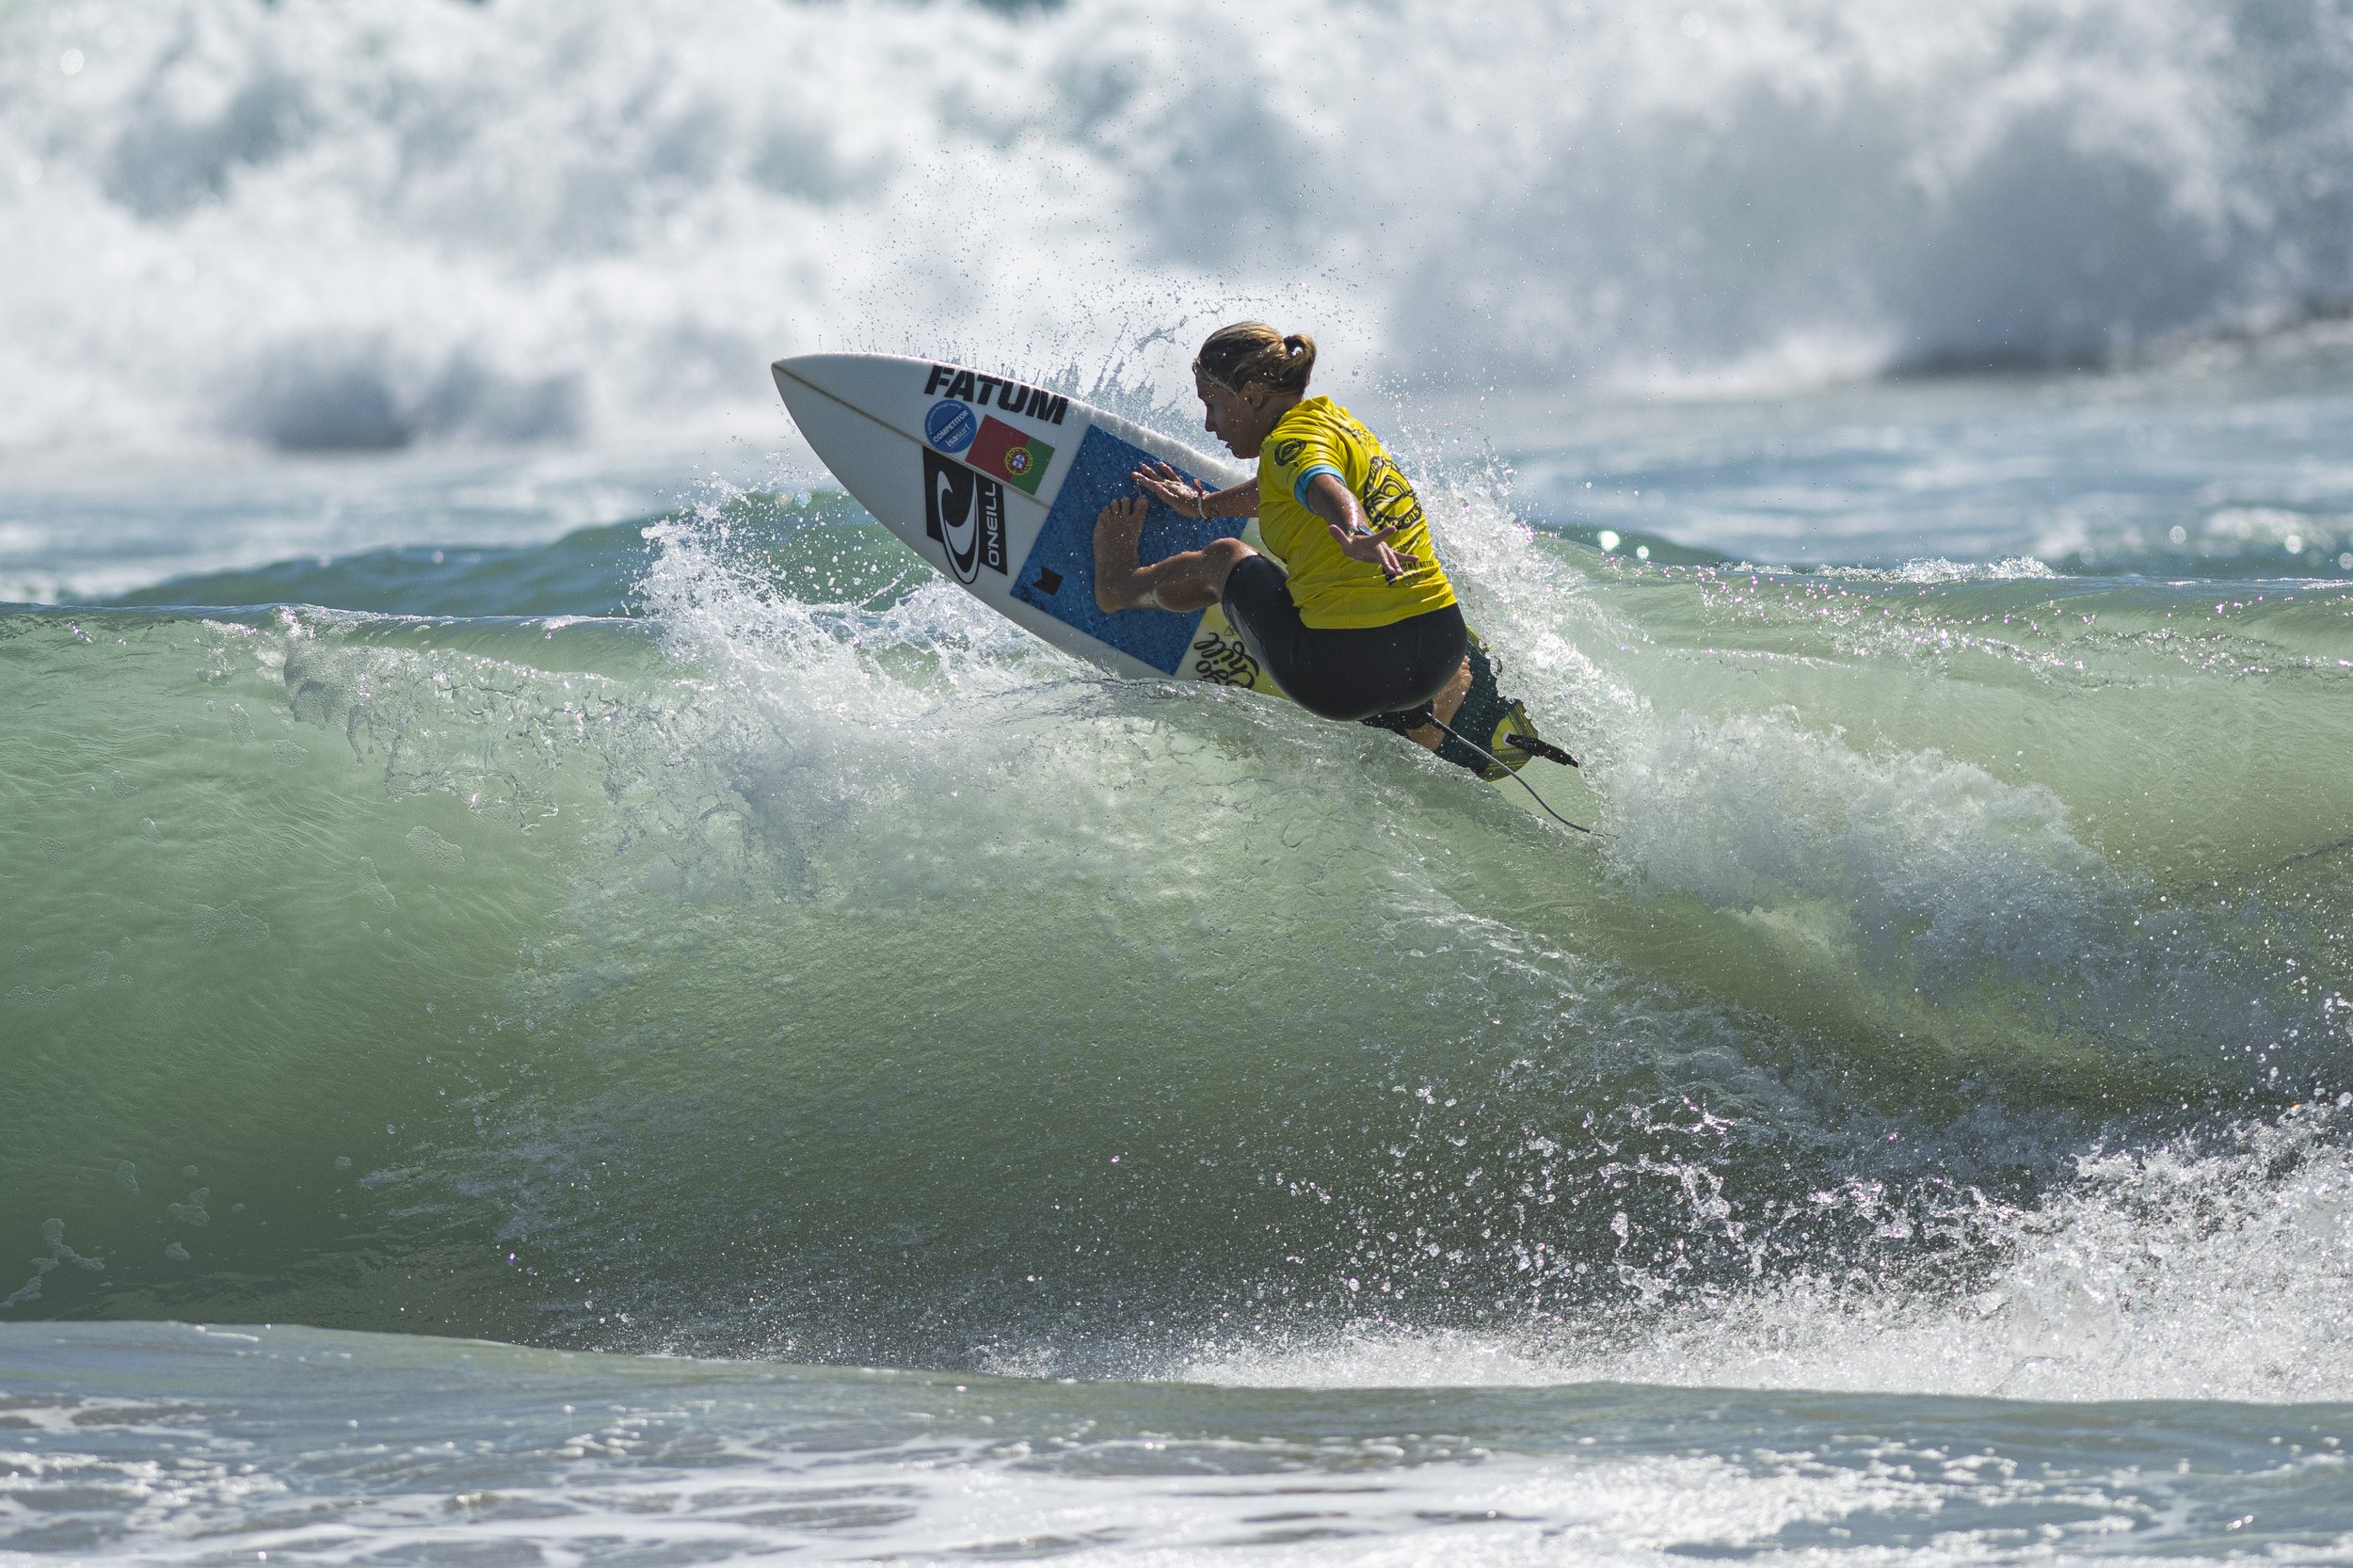  Katinka Sorensen from Denmark carves a wave during her first attempt at qualifications. (Jon Putman | The Corsair) 